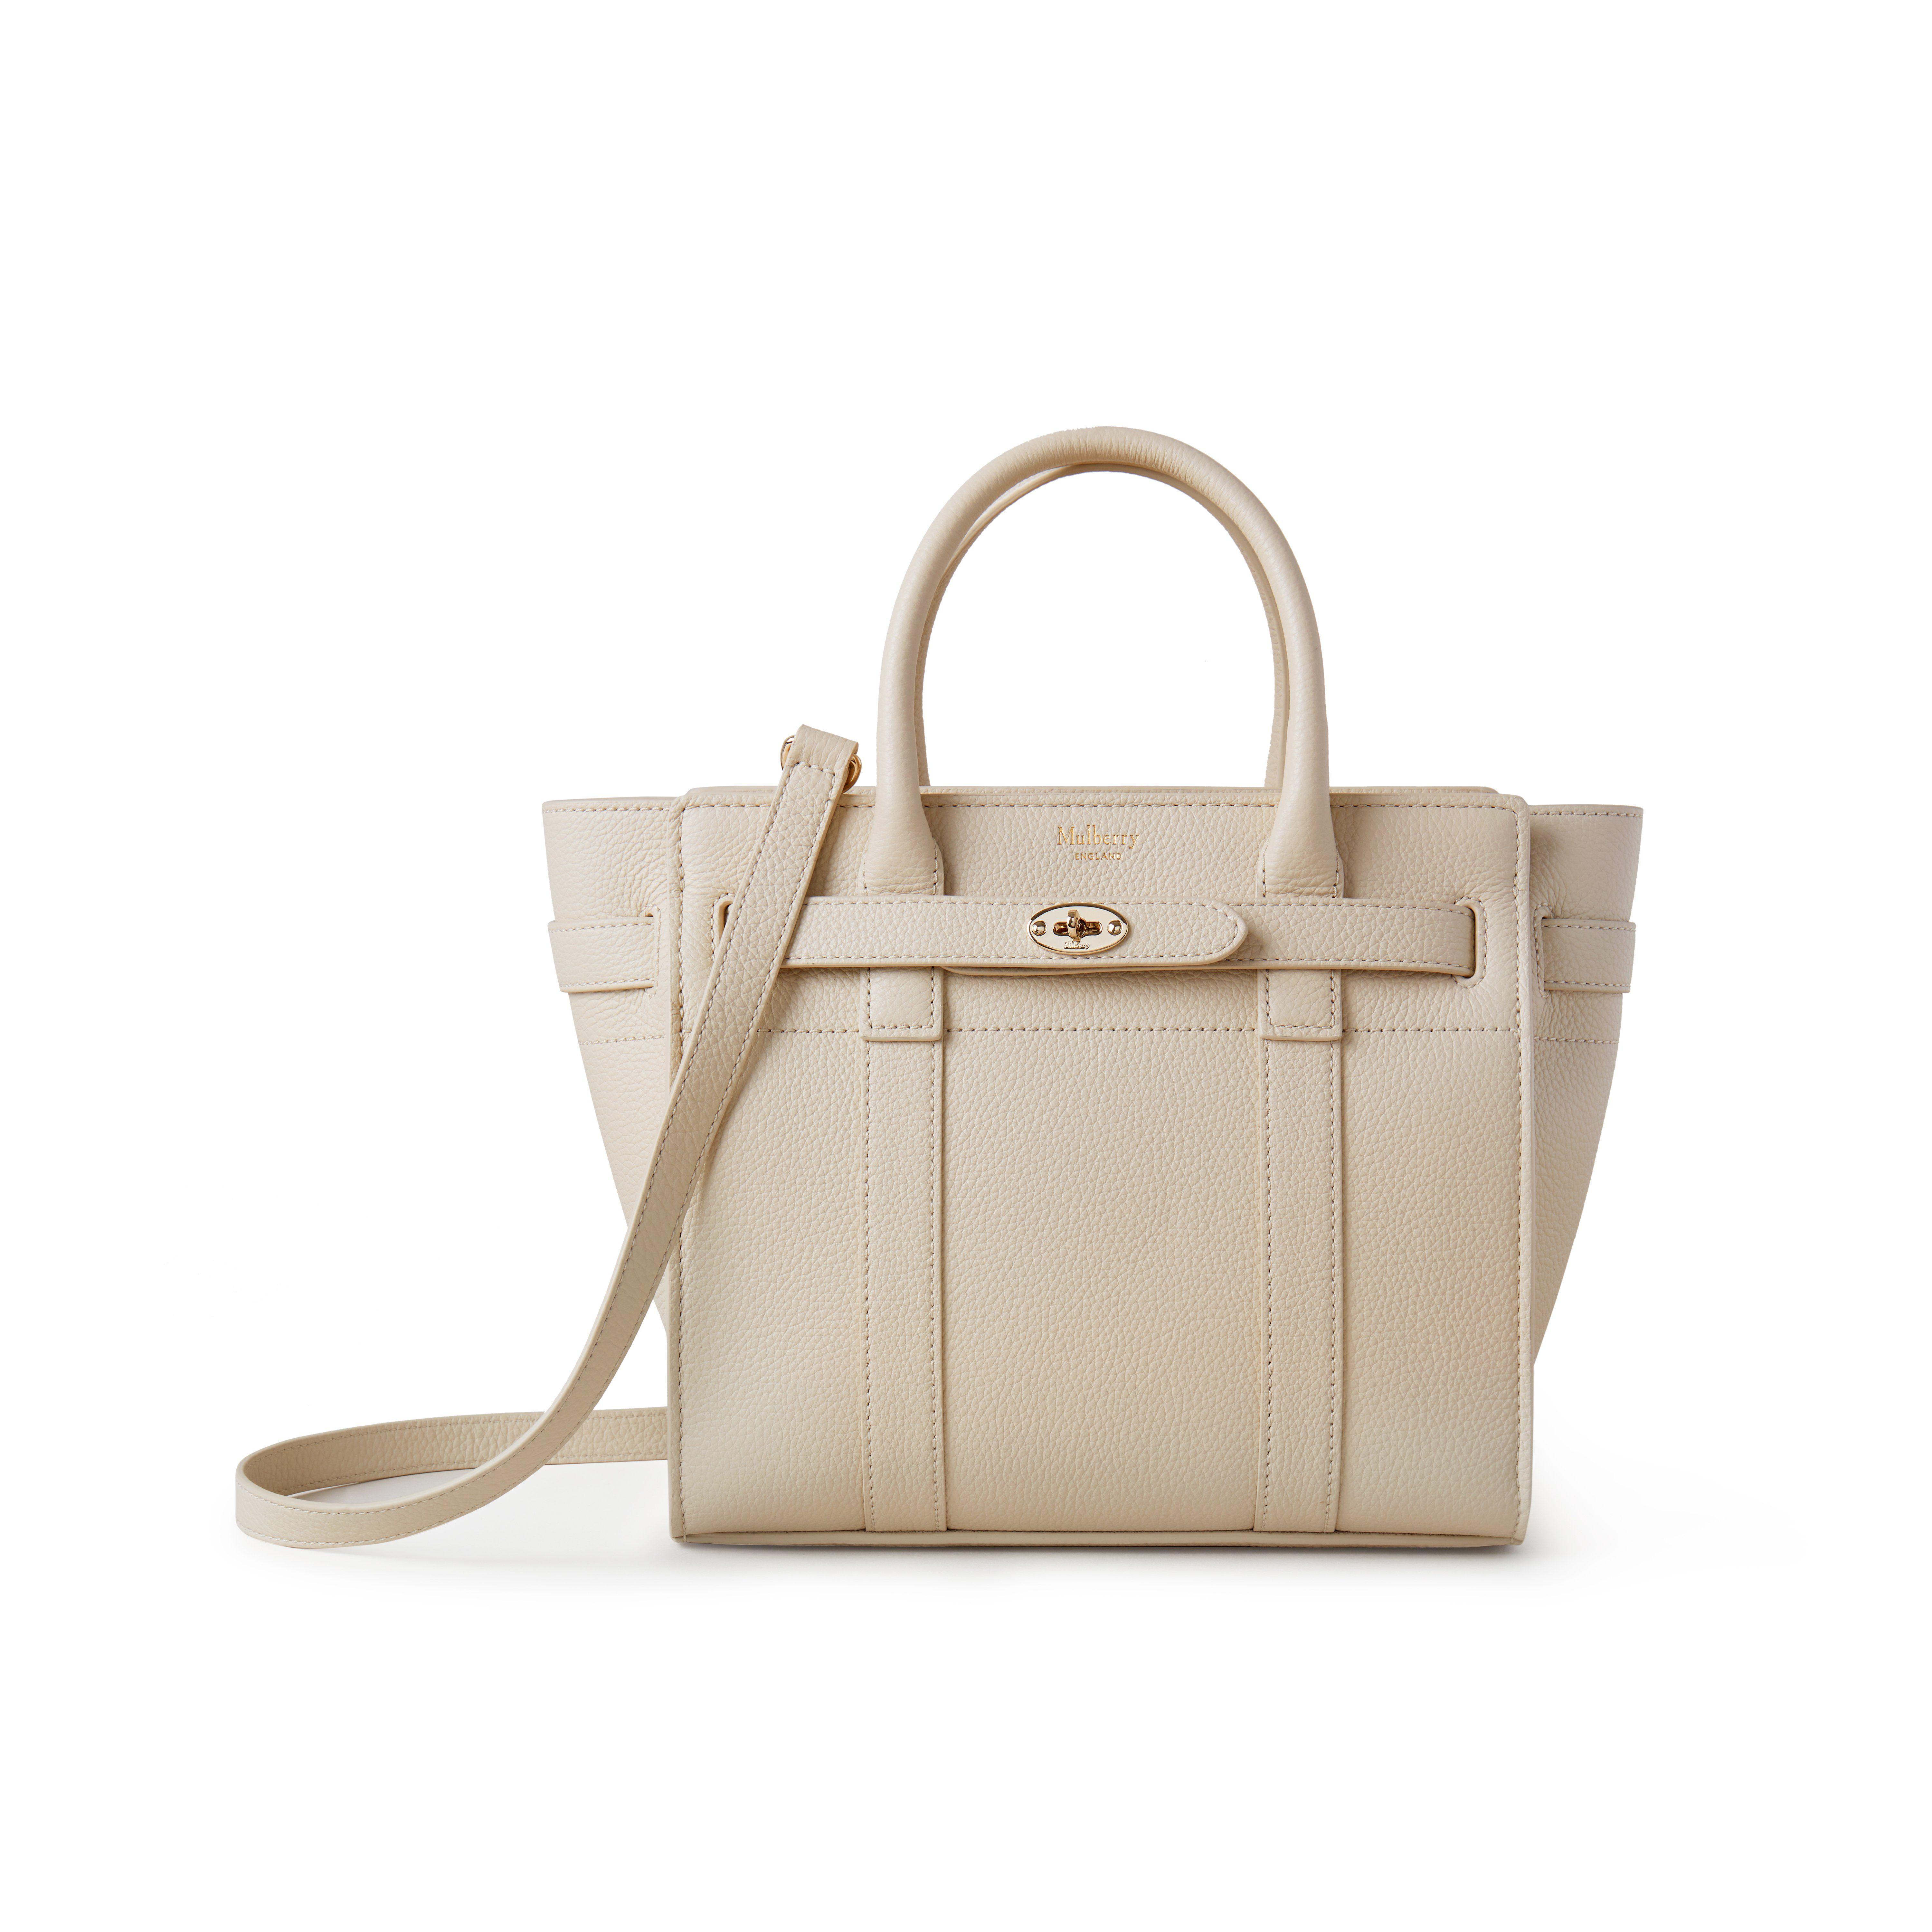 Mulberry Mini Bayswater Cross-body Bag in Natural | Lyst